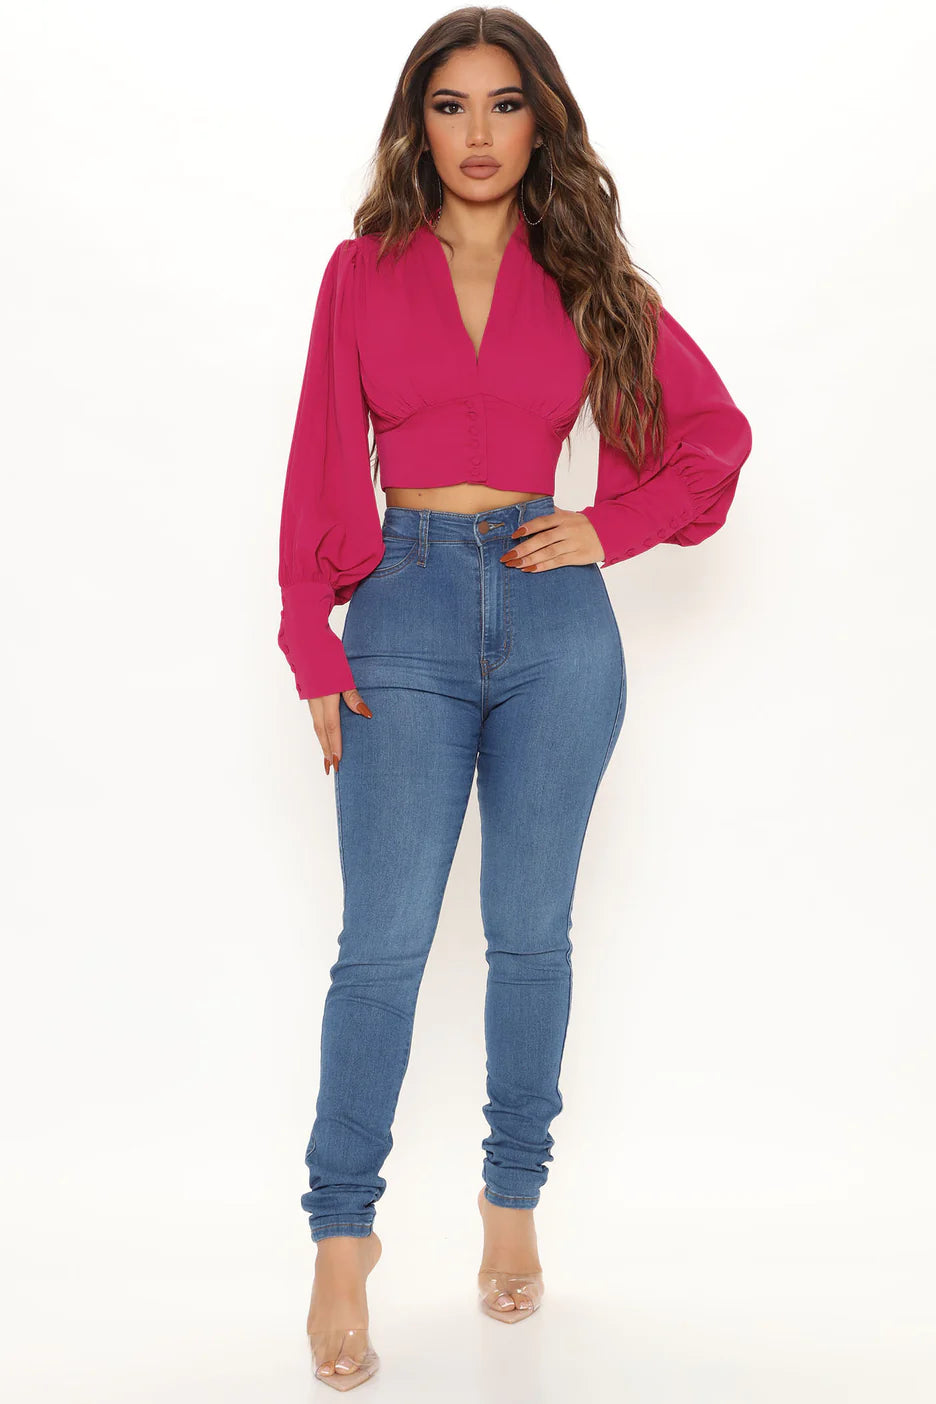 Fashionnova Meetings All Day Cropped Blouse